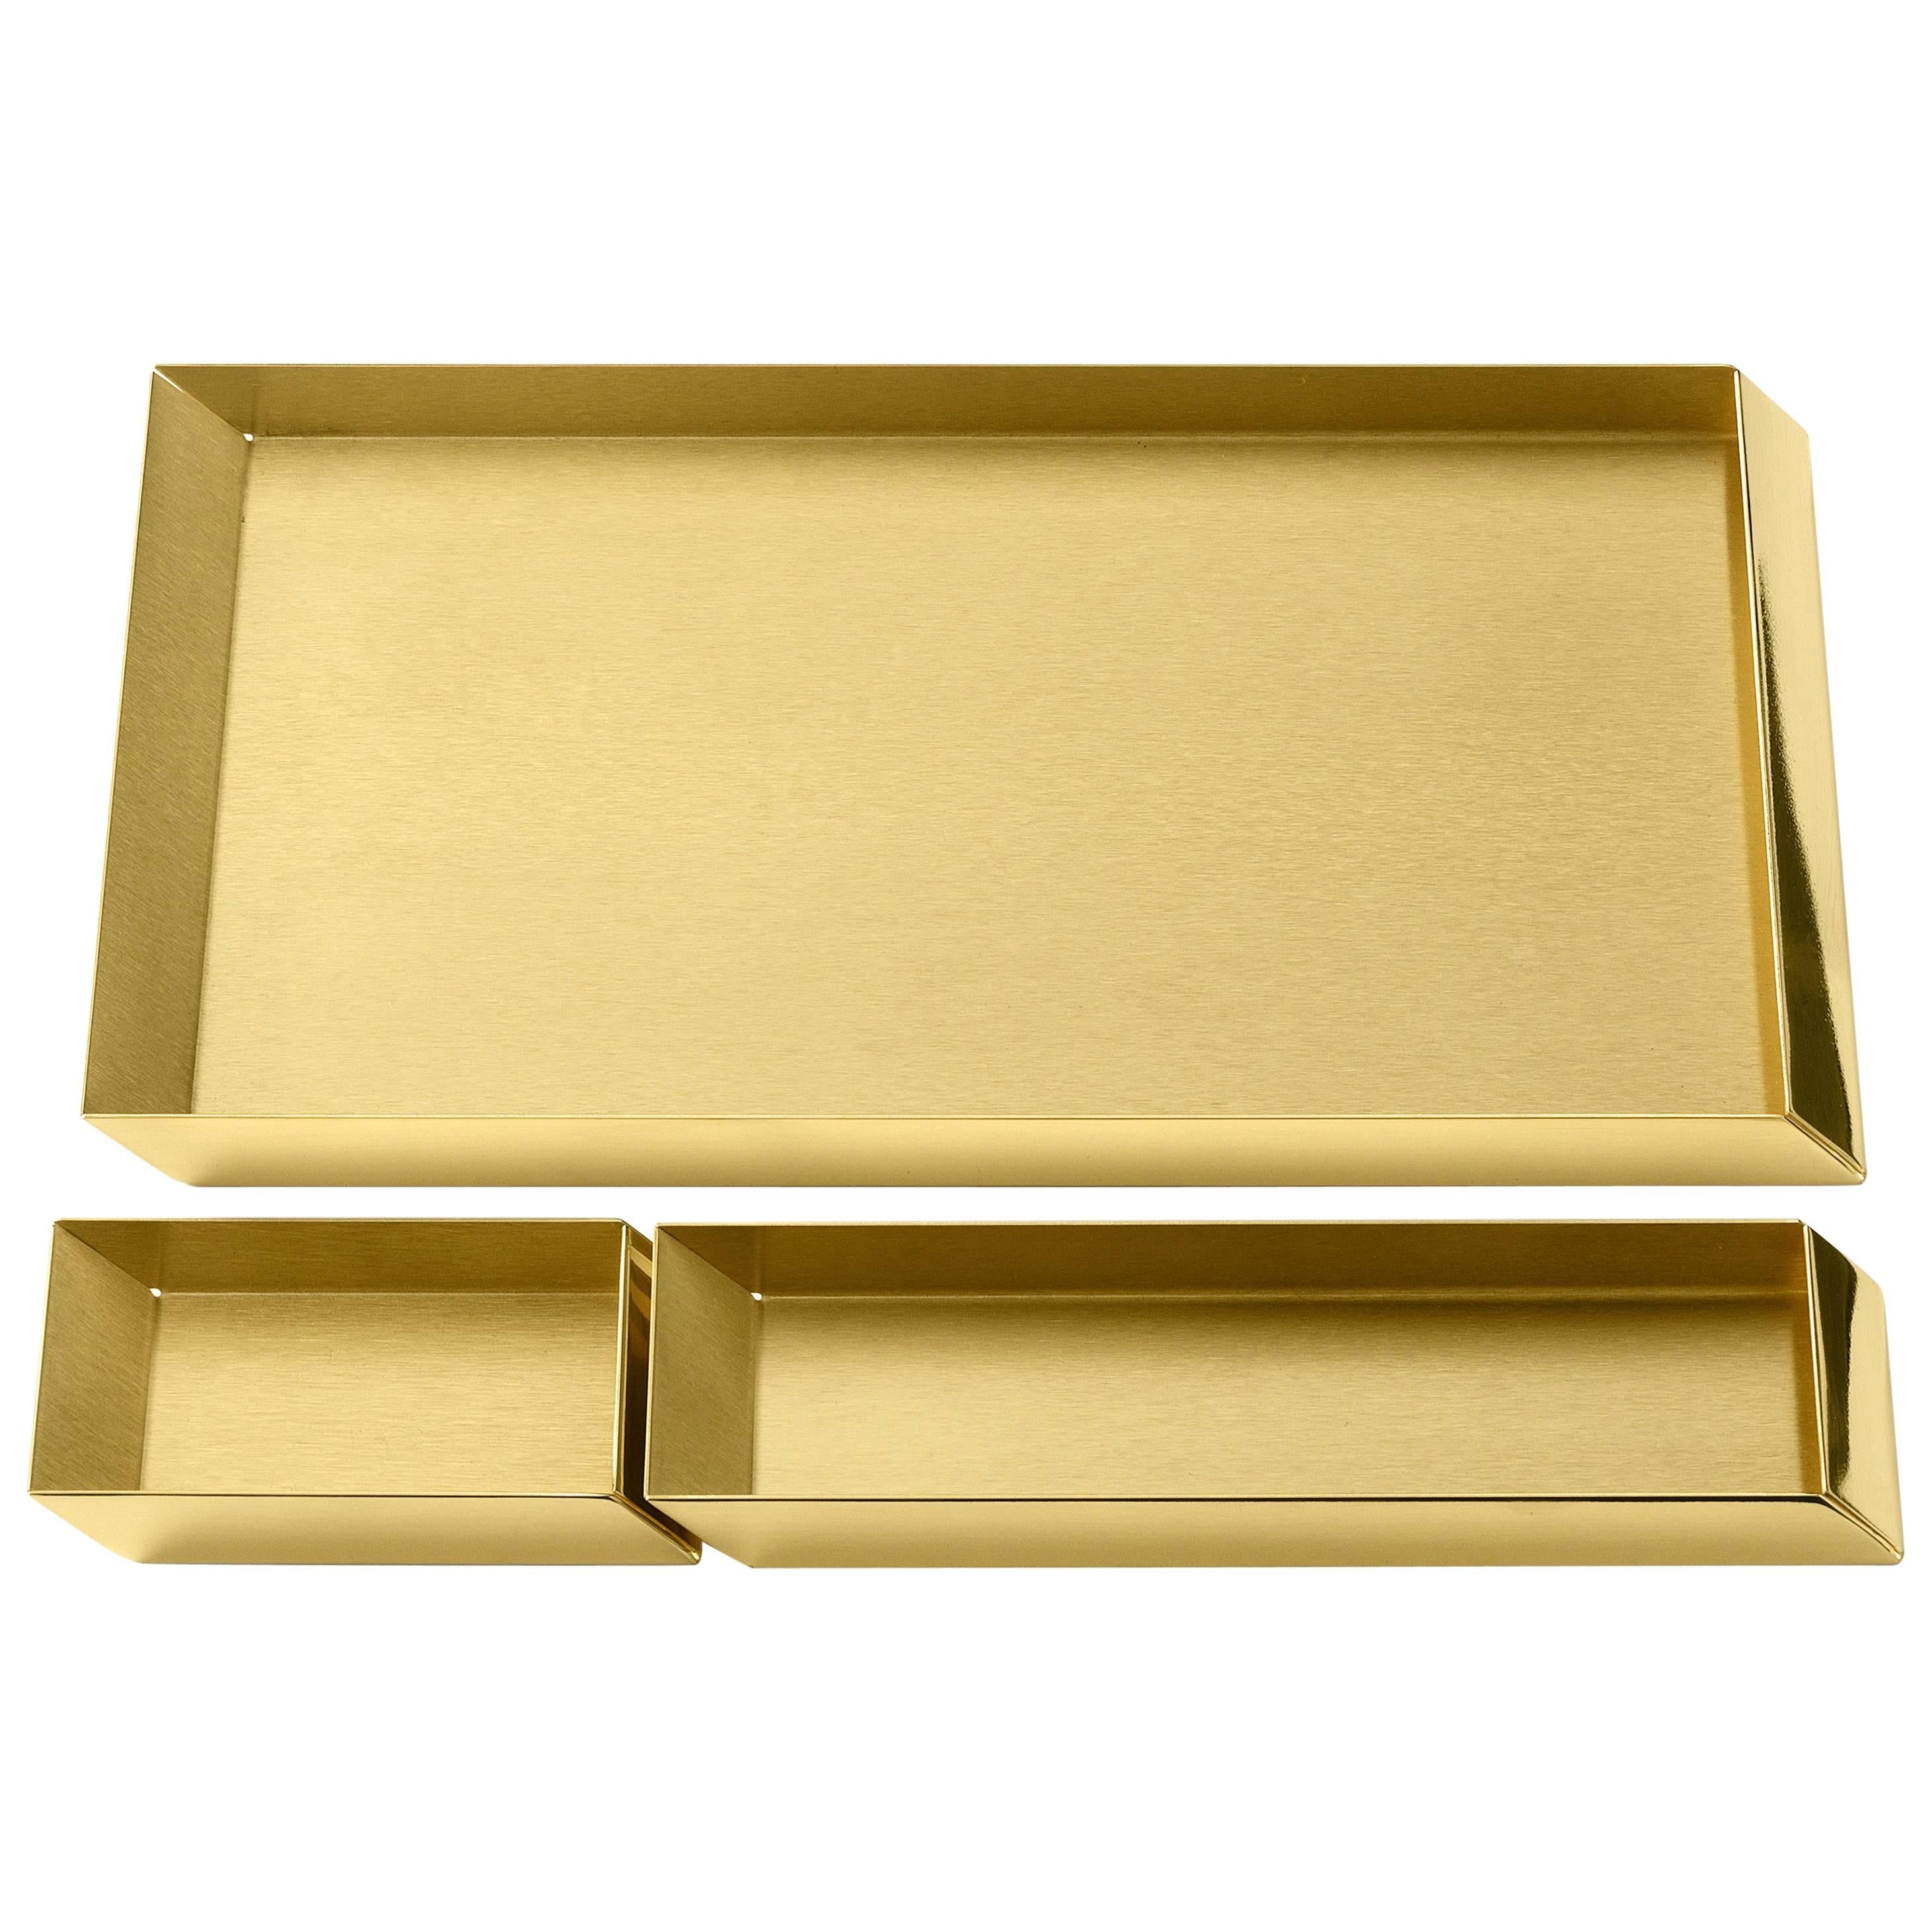 Ghidini 1961 Axonometry Desk Trays Set in Polished Brass For Sale